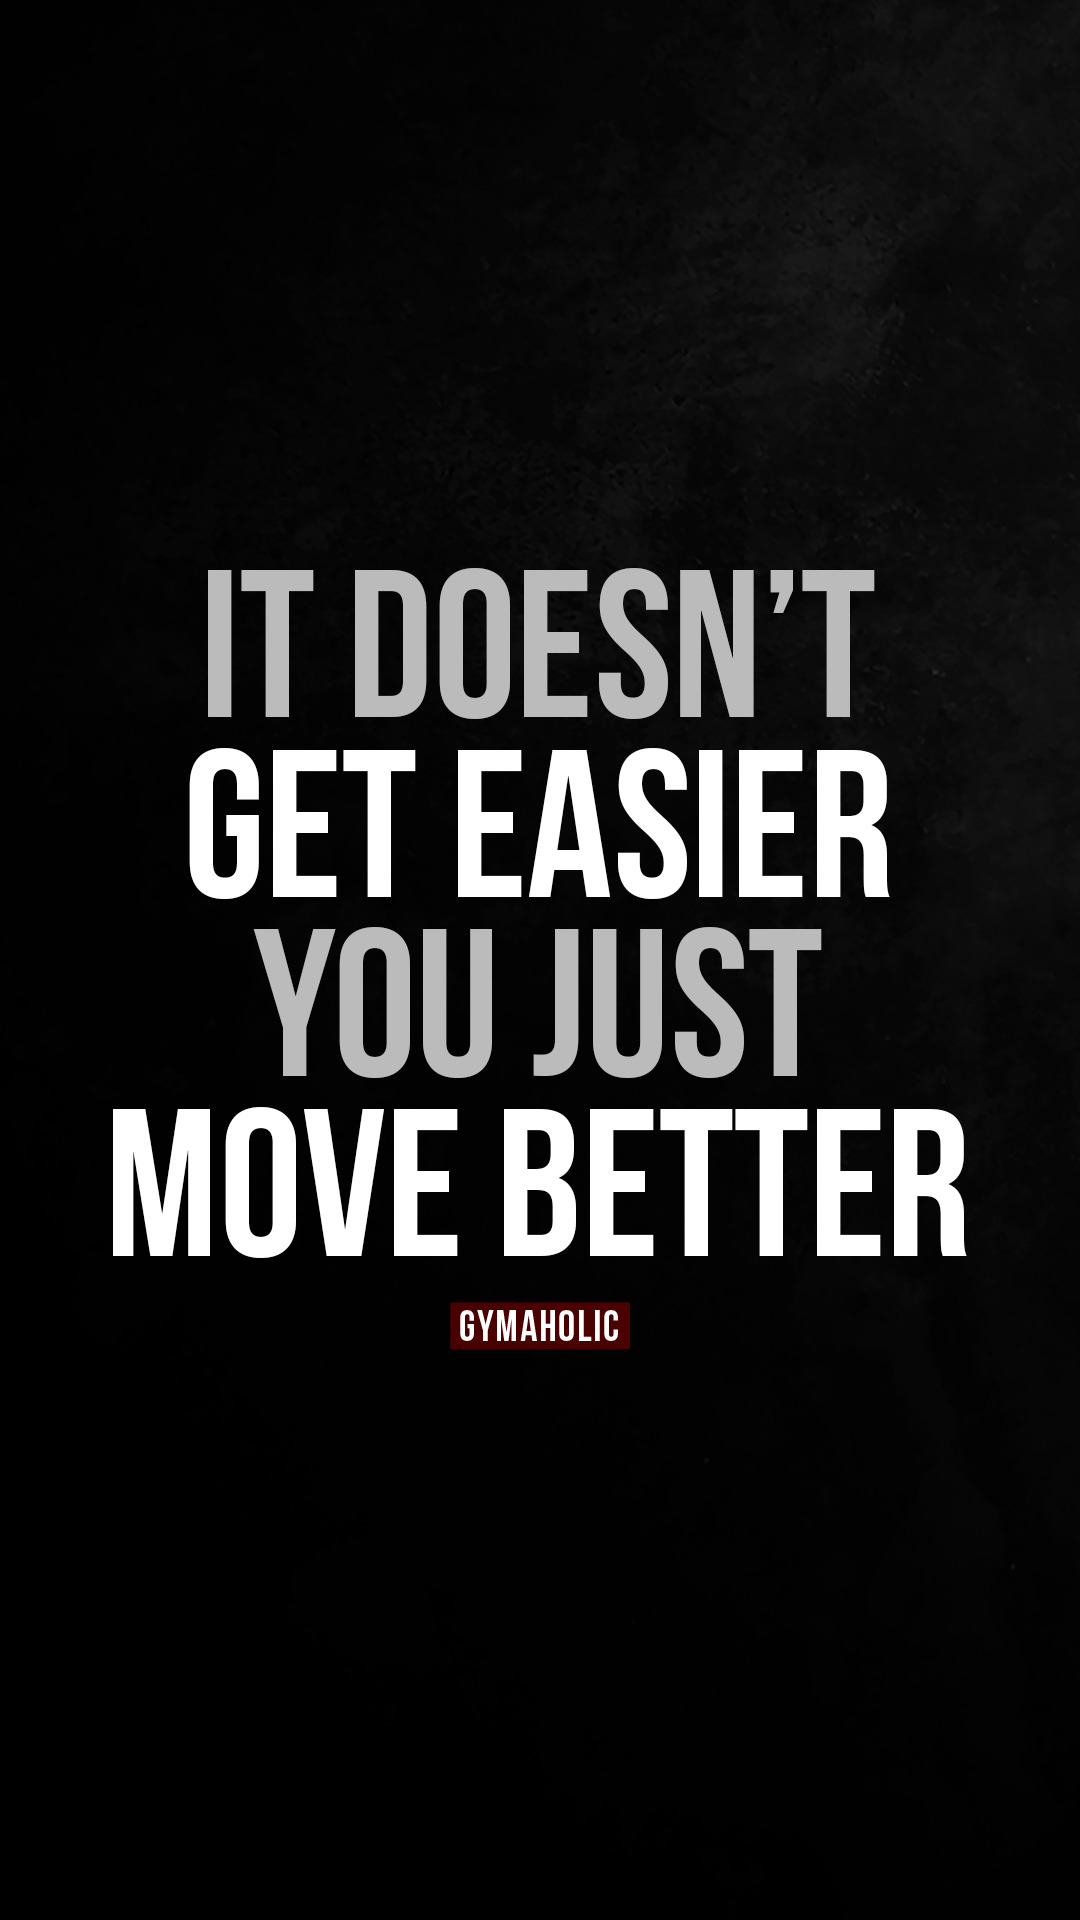 It doesn’t get easier, you just move better